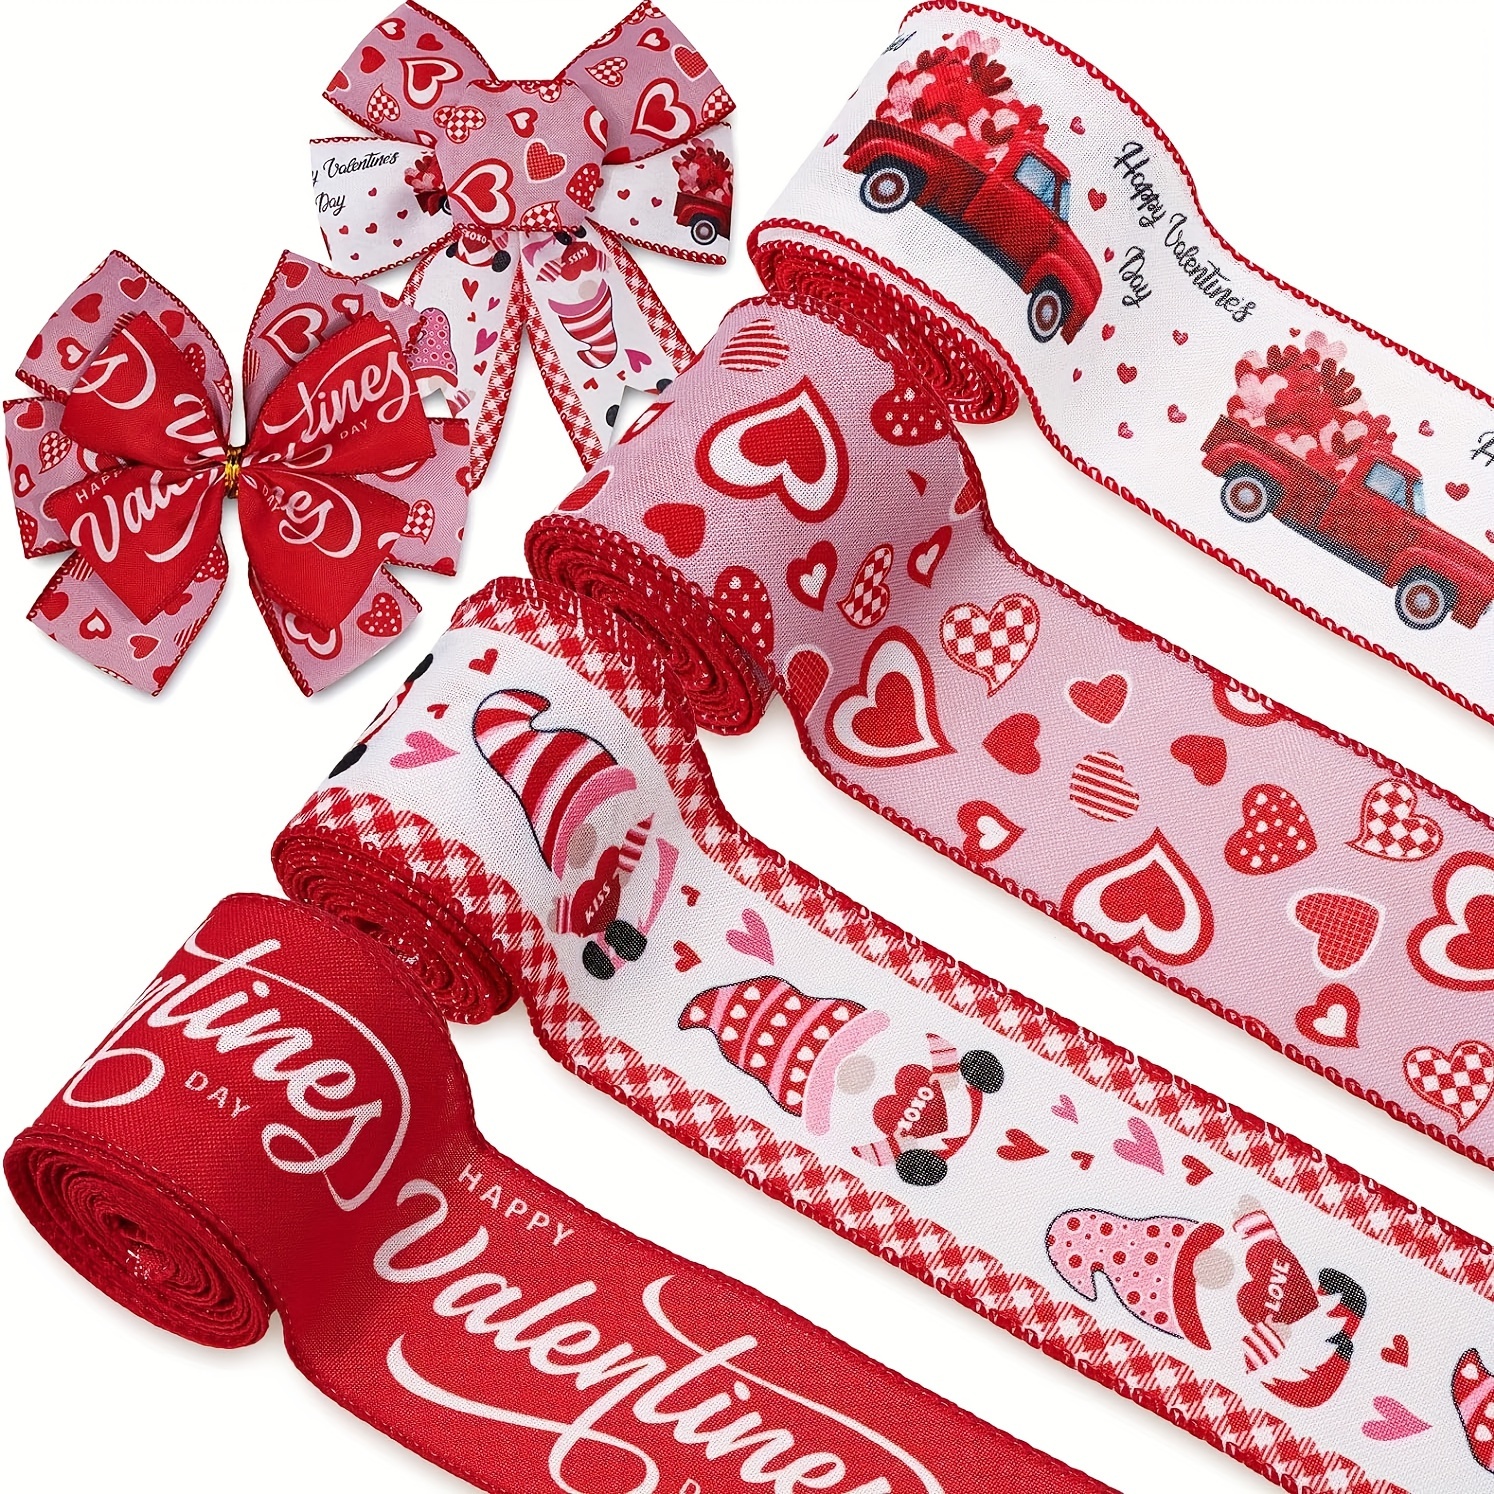 30 Yards Valentine's Day Wired Edge Ribbon 2.5 Inch Buffalo Plaids Heart